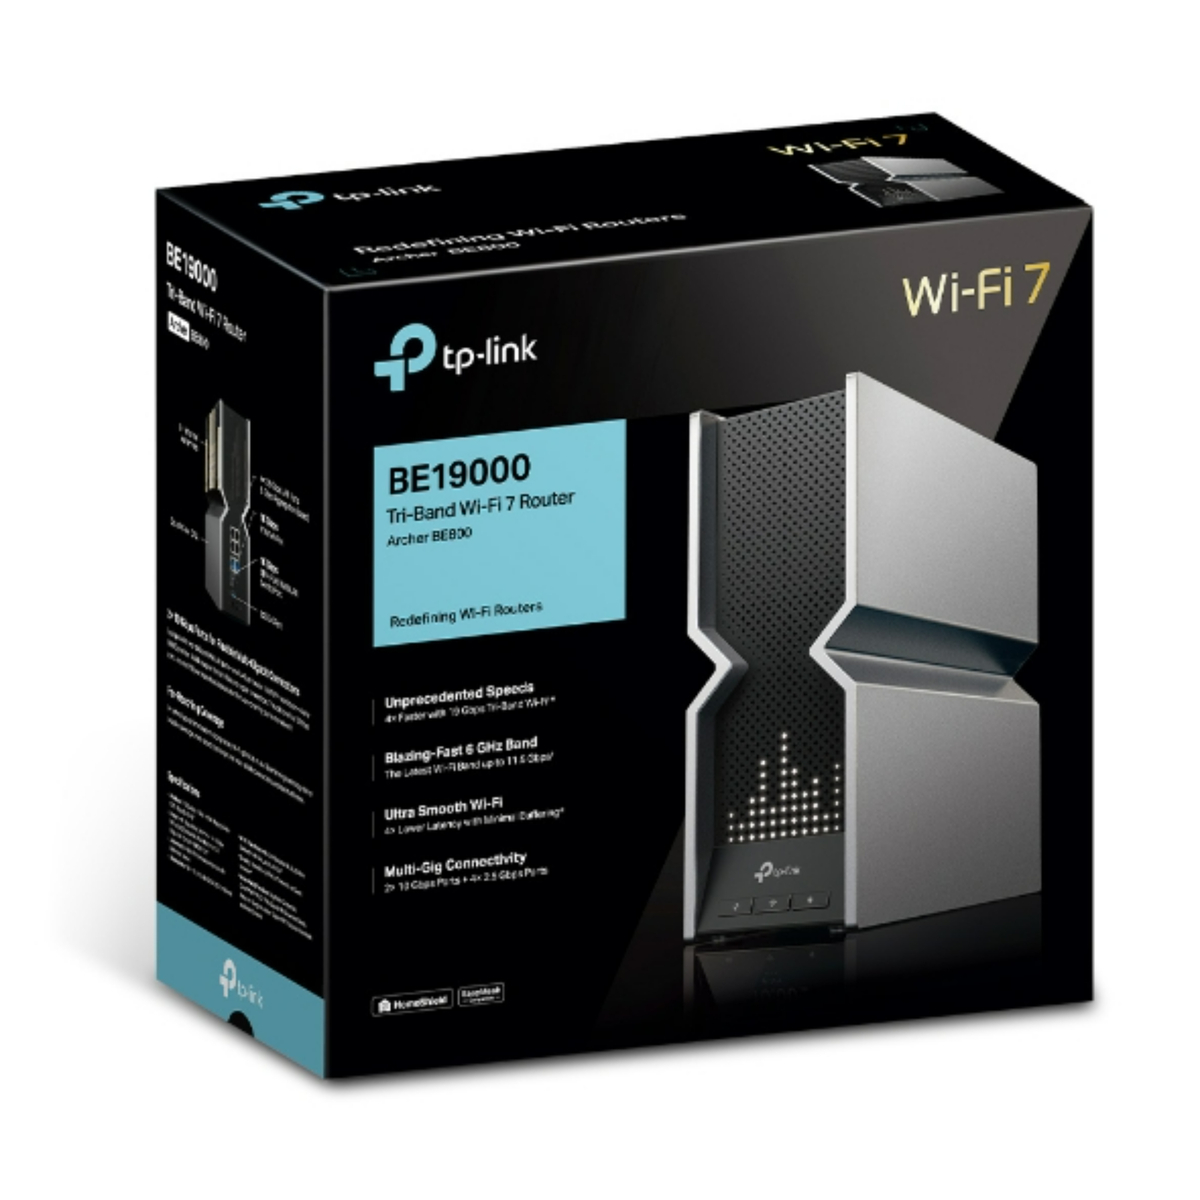 Tp-Link BE19000 Tri-Band Wi-Fi 7 Router, Archer BE800